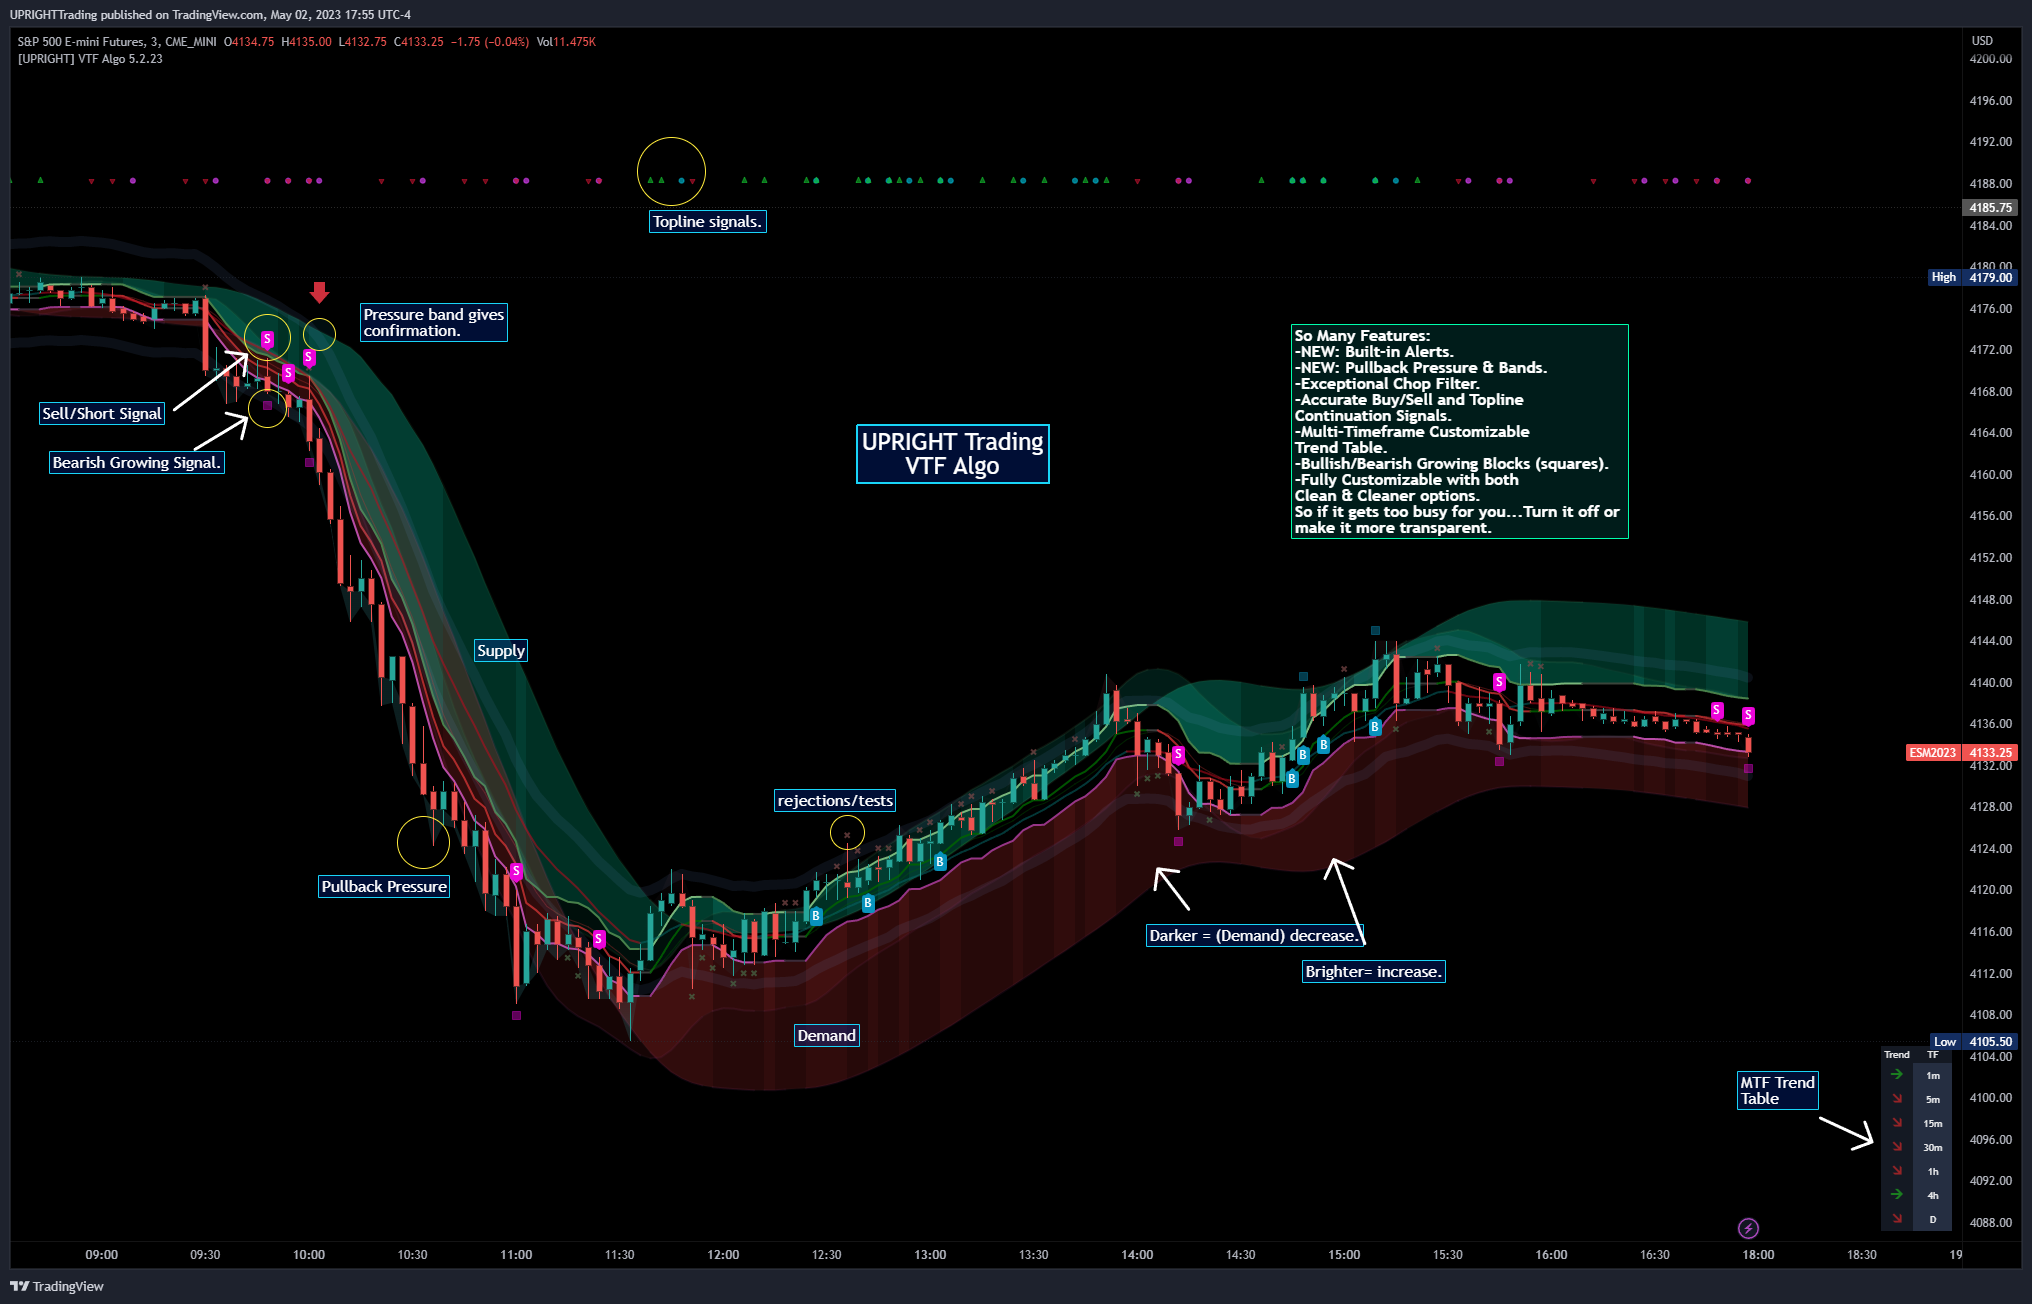 The Best Indicators for Day Trading - UPRIGHT - VTF Algo